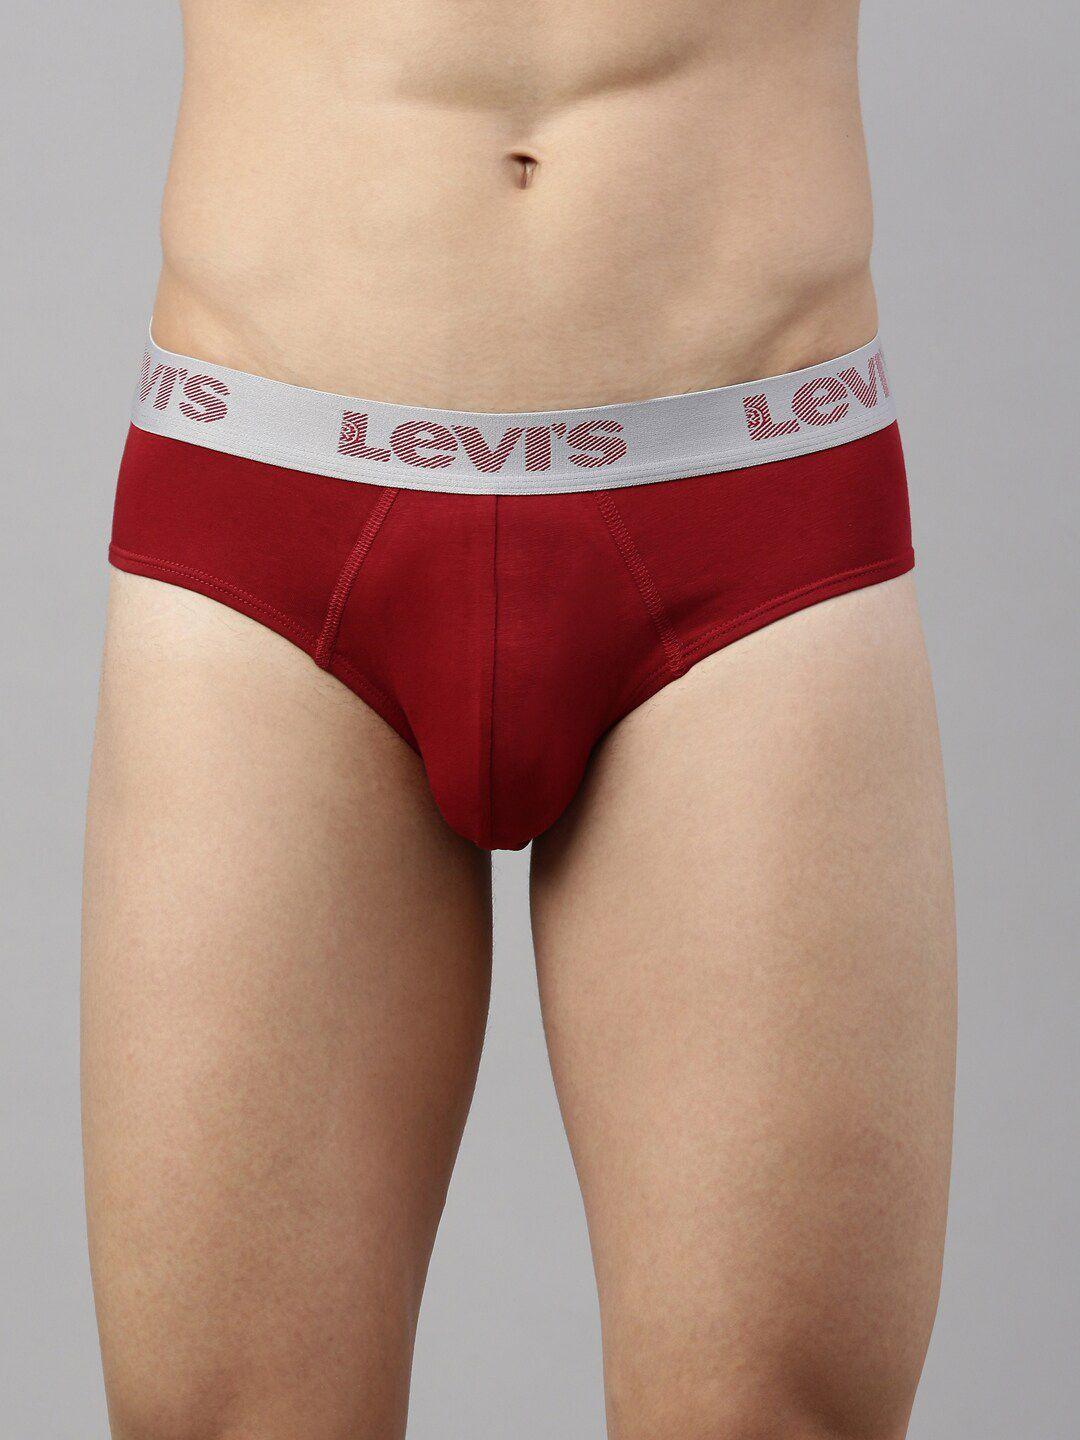 levis-men-smartskin-technology-cotton-active-briefs-with-tag-free-comfort-#066